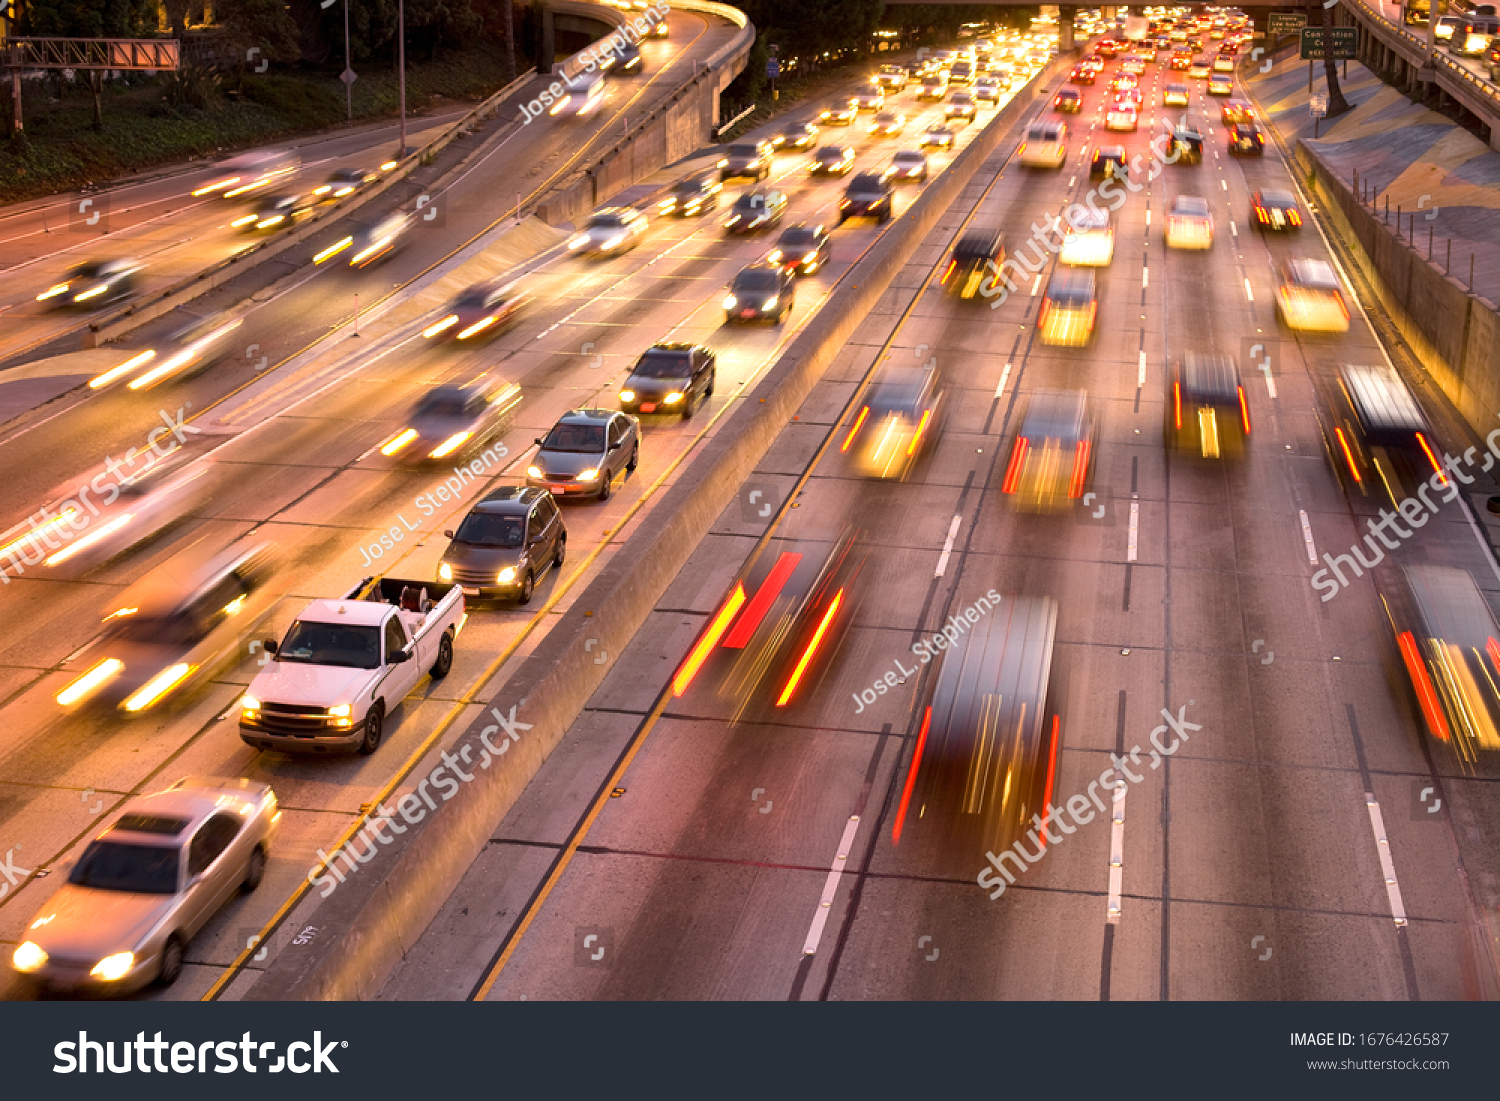 Traffic on Harbor Freeway, downtown Los Angeles, California, United States #1676426587